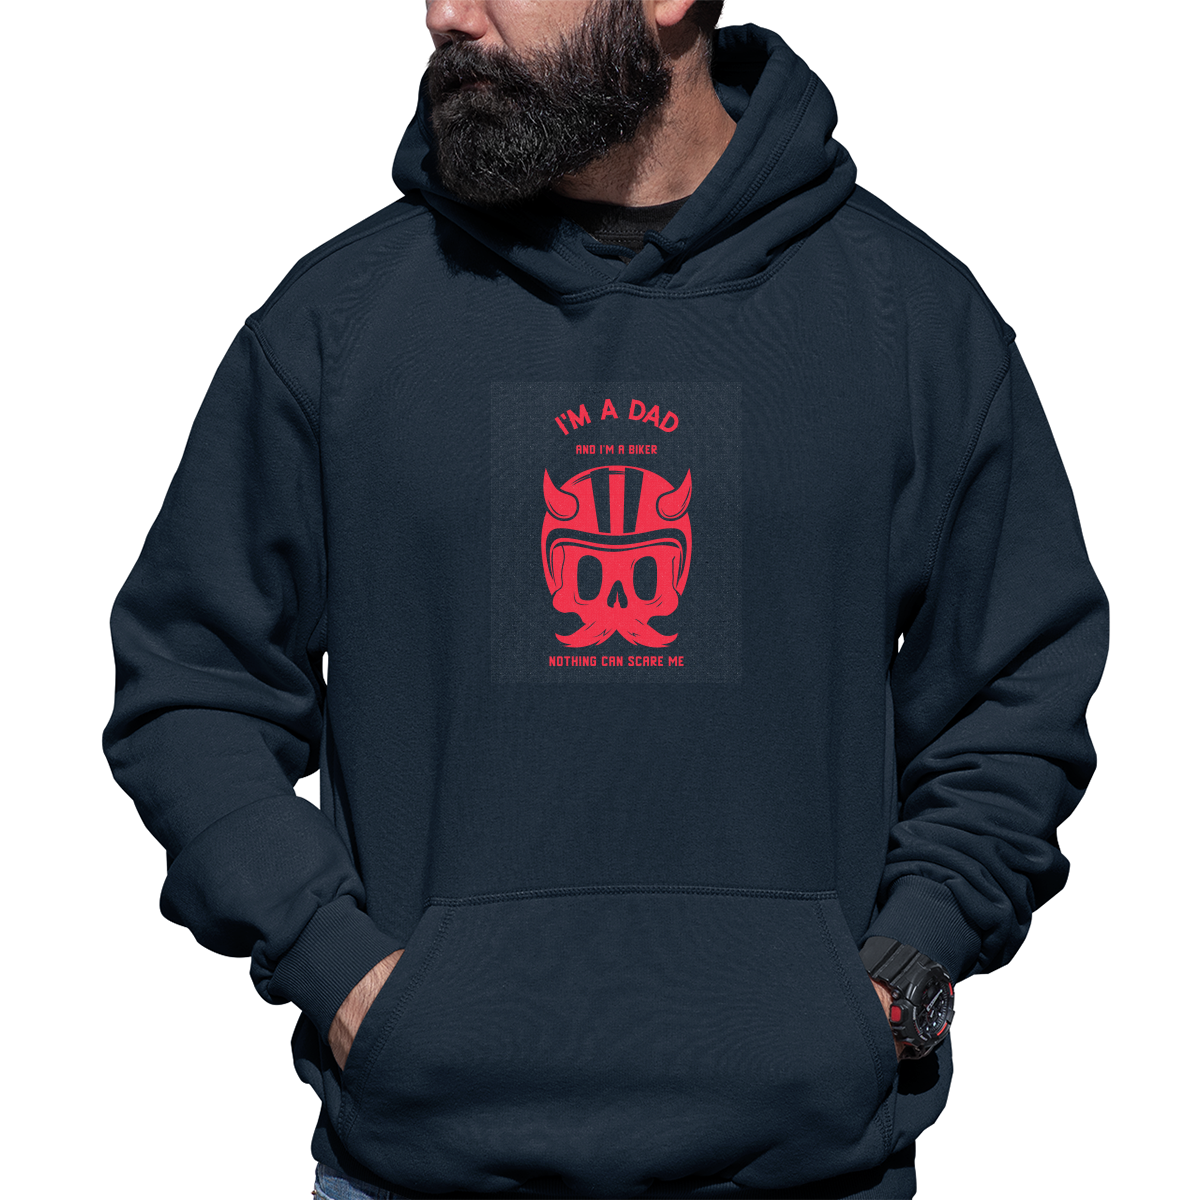 I'm a dad and a biker Unisex Hoodie | Navy